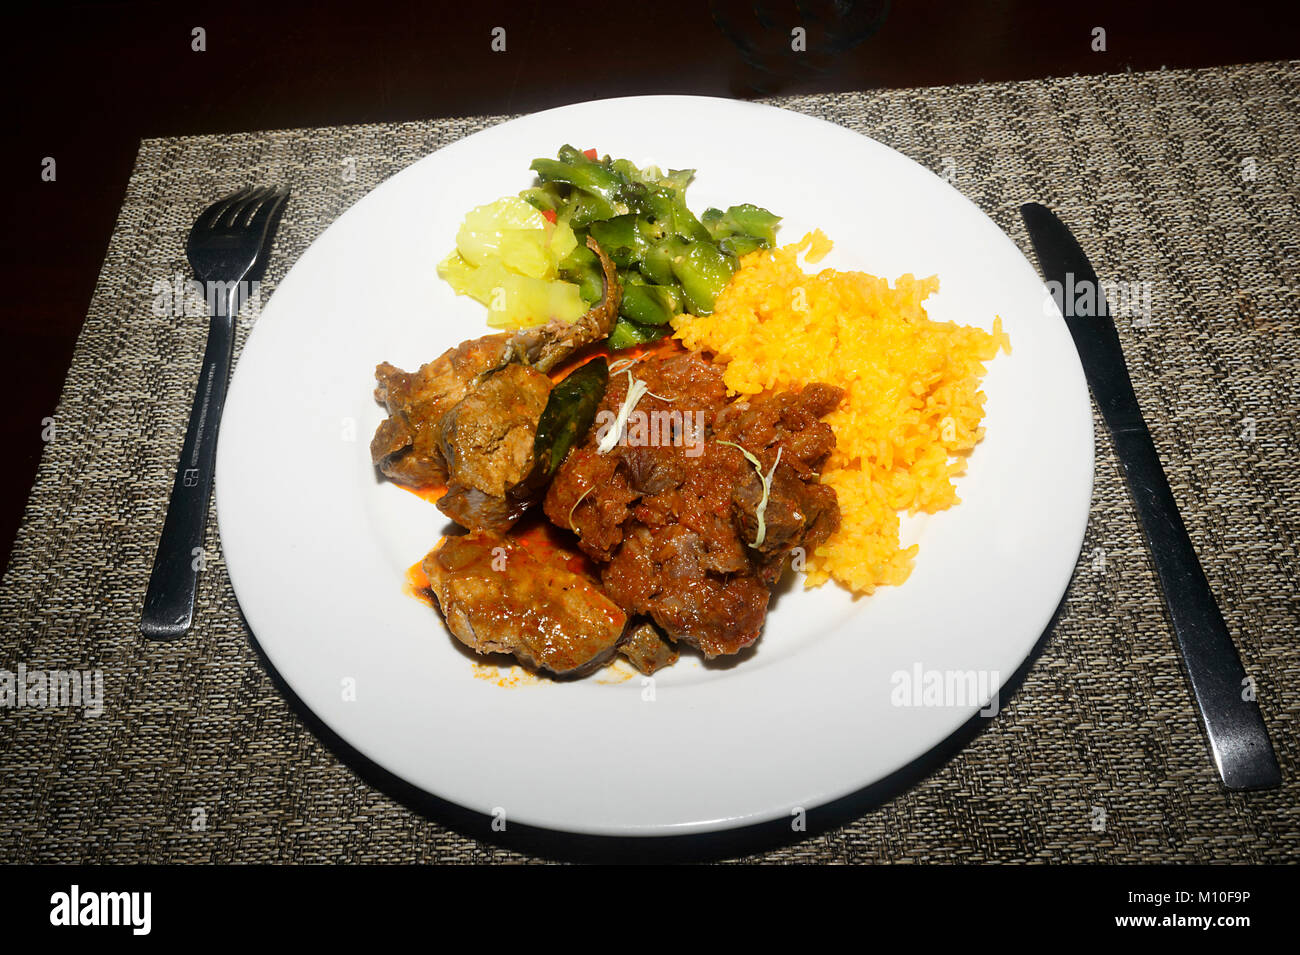 A Malaysian dish of Beef Asam Pedas with rice and fresh vegetables served at Tabin Wildlife Resort, Sabah, Borneo, Malaysia Stock Photo